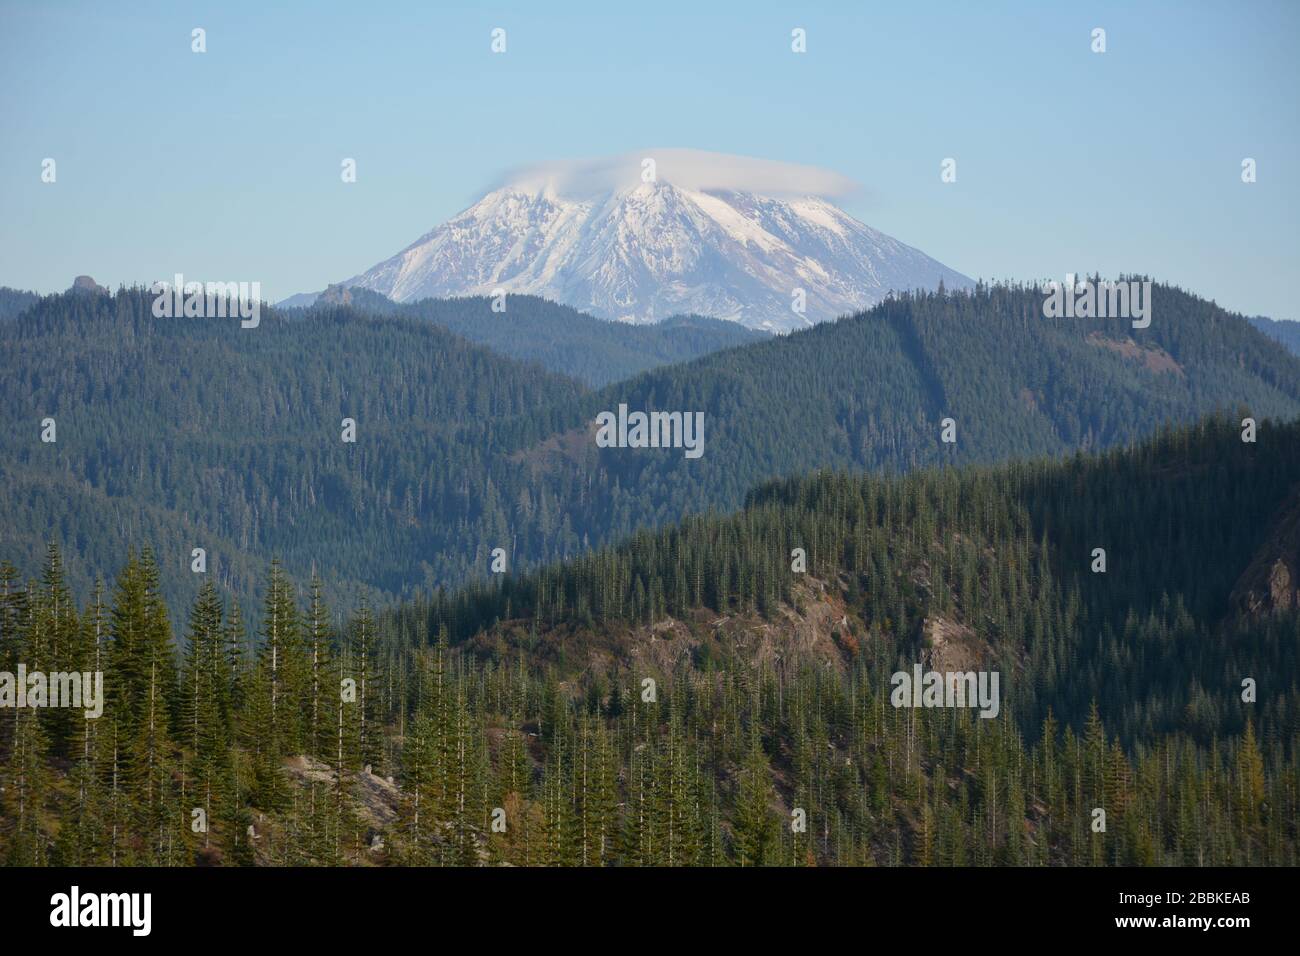 The east side of Mt St Helens seen from behind forested mountain ridges in the Gifford Pinchot National Forest,, Washington State, USA. Stock Photo